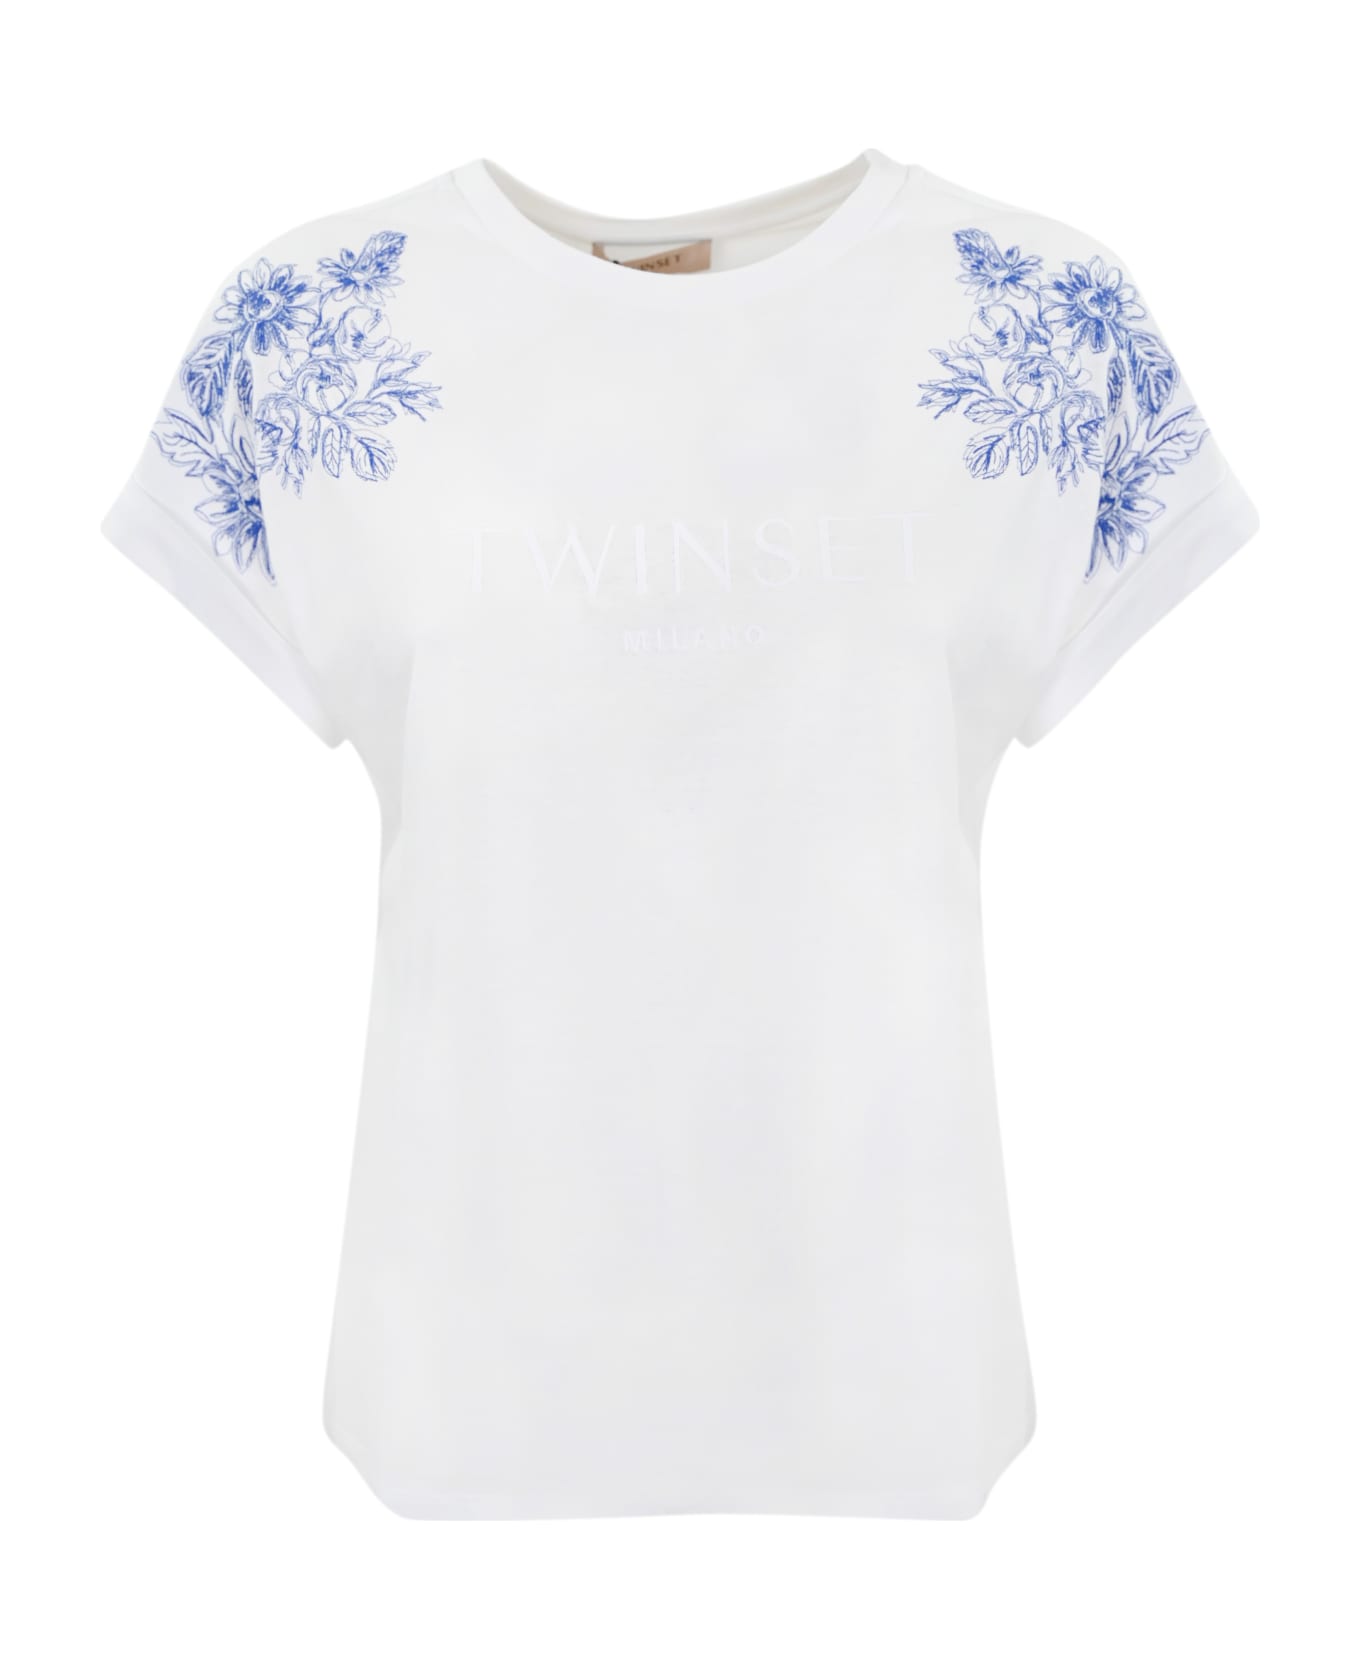 TwinSet T-shirt With Floral Embroidery - Ric.fiore blu/bianco Tシャツ